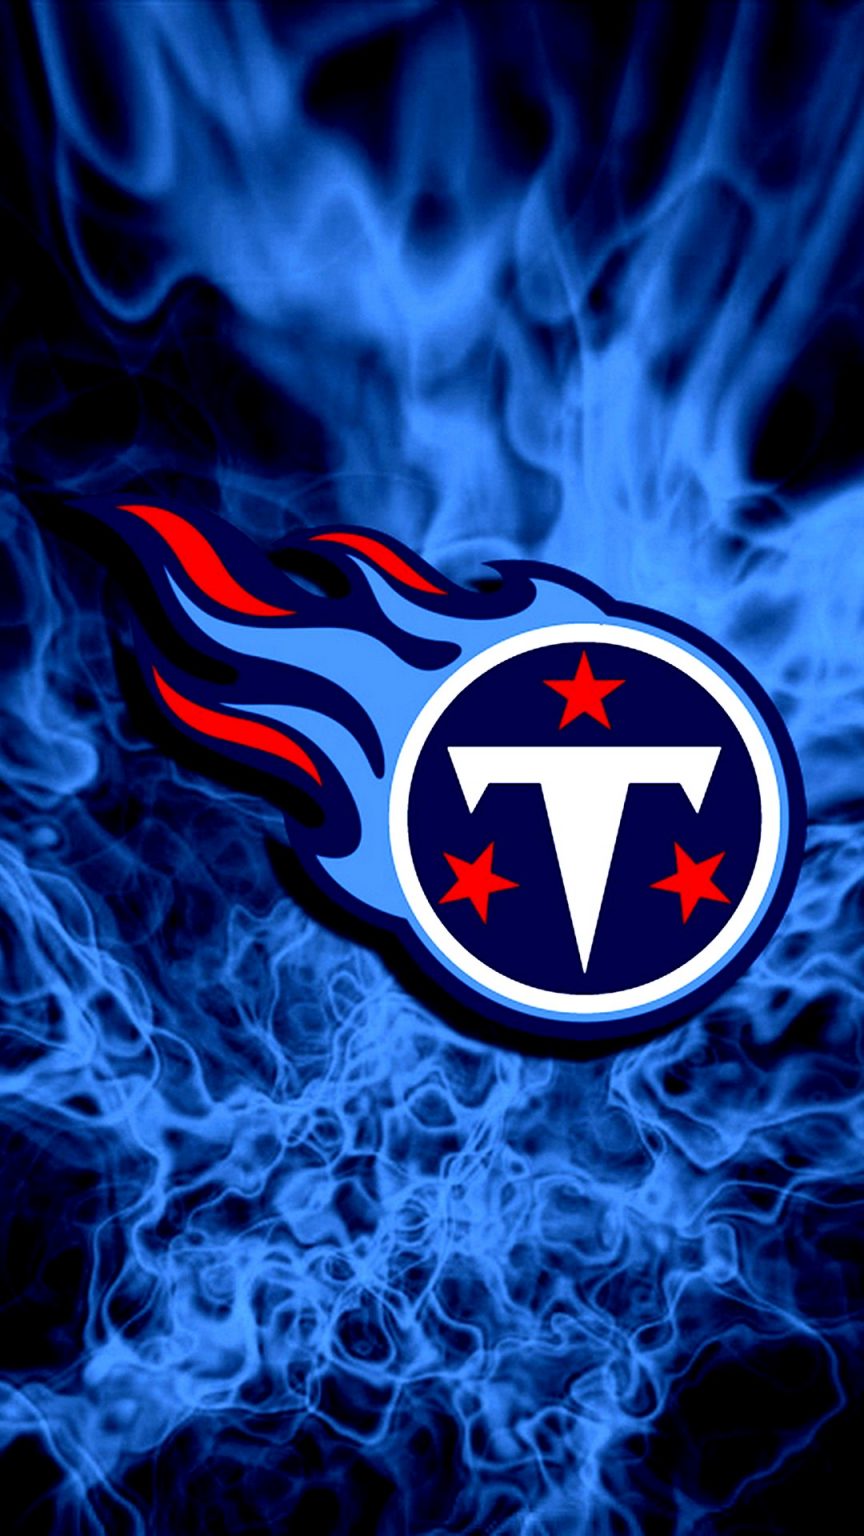 Wallpapers Iphone Tennessee Titans Nfl Iphone Wallpaper